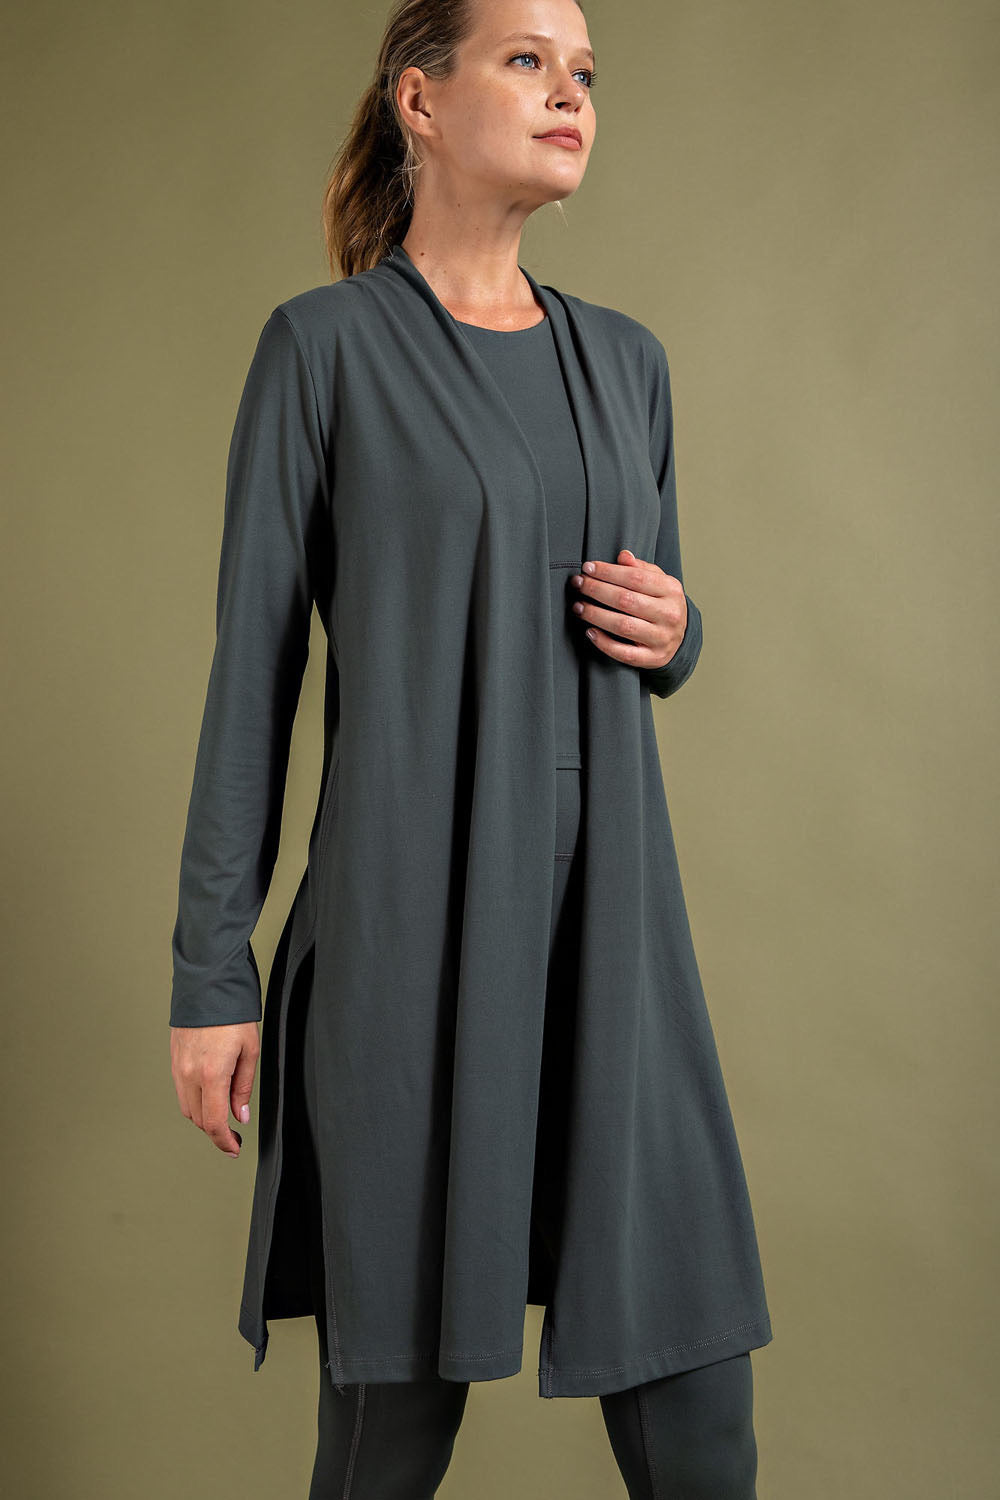 Smoked Spruce Plus Size Butter Soft Long Sleeve Cardigan with 4 Way Stretch and Side Slits